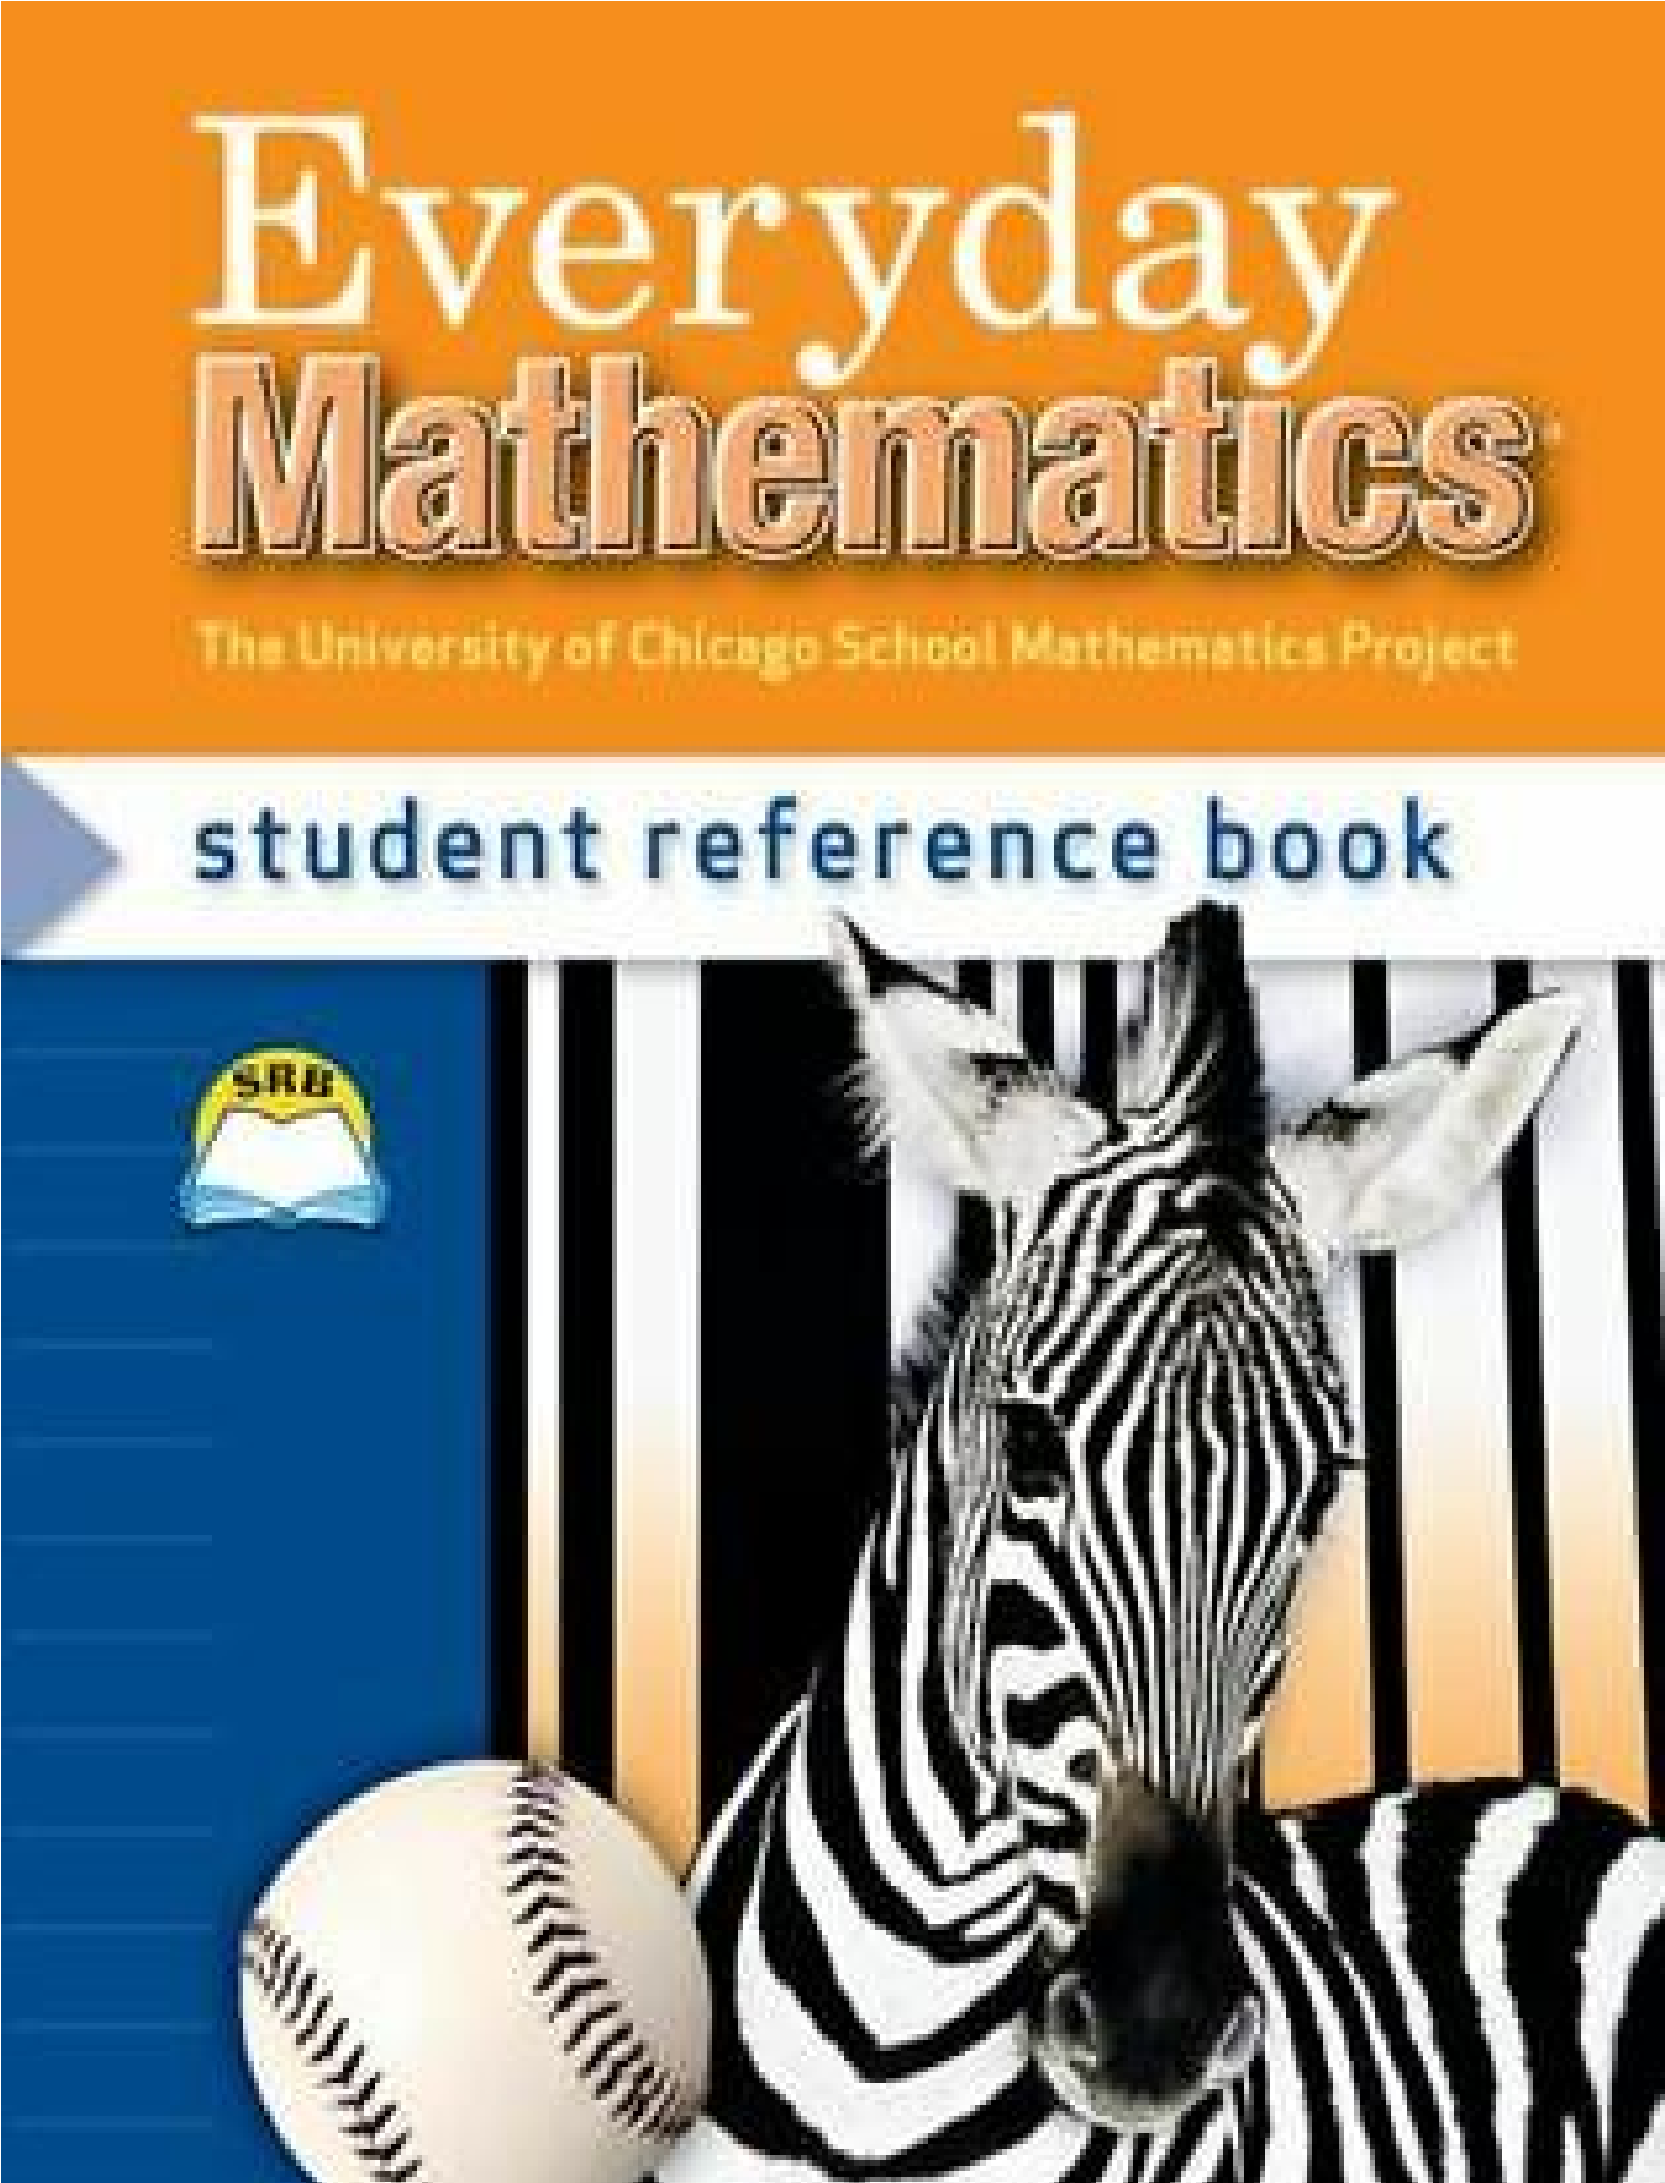 Everyday mathematics : The University of Chicago school Mathematics Project = Student Reference Book